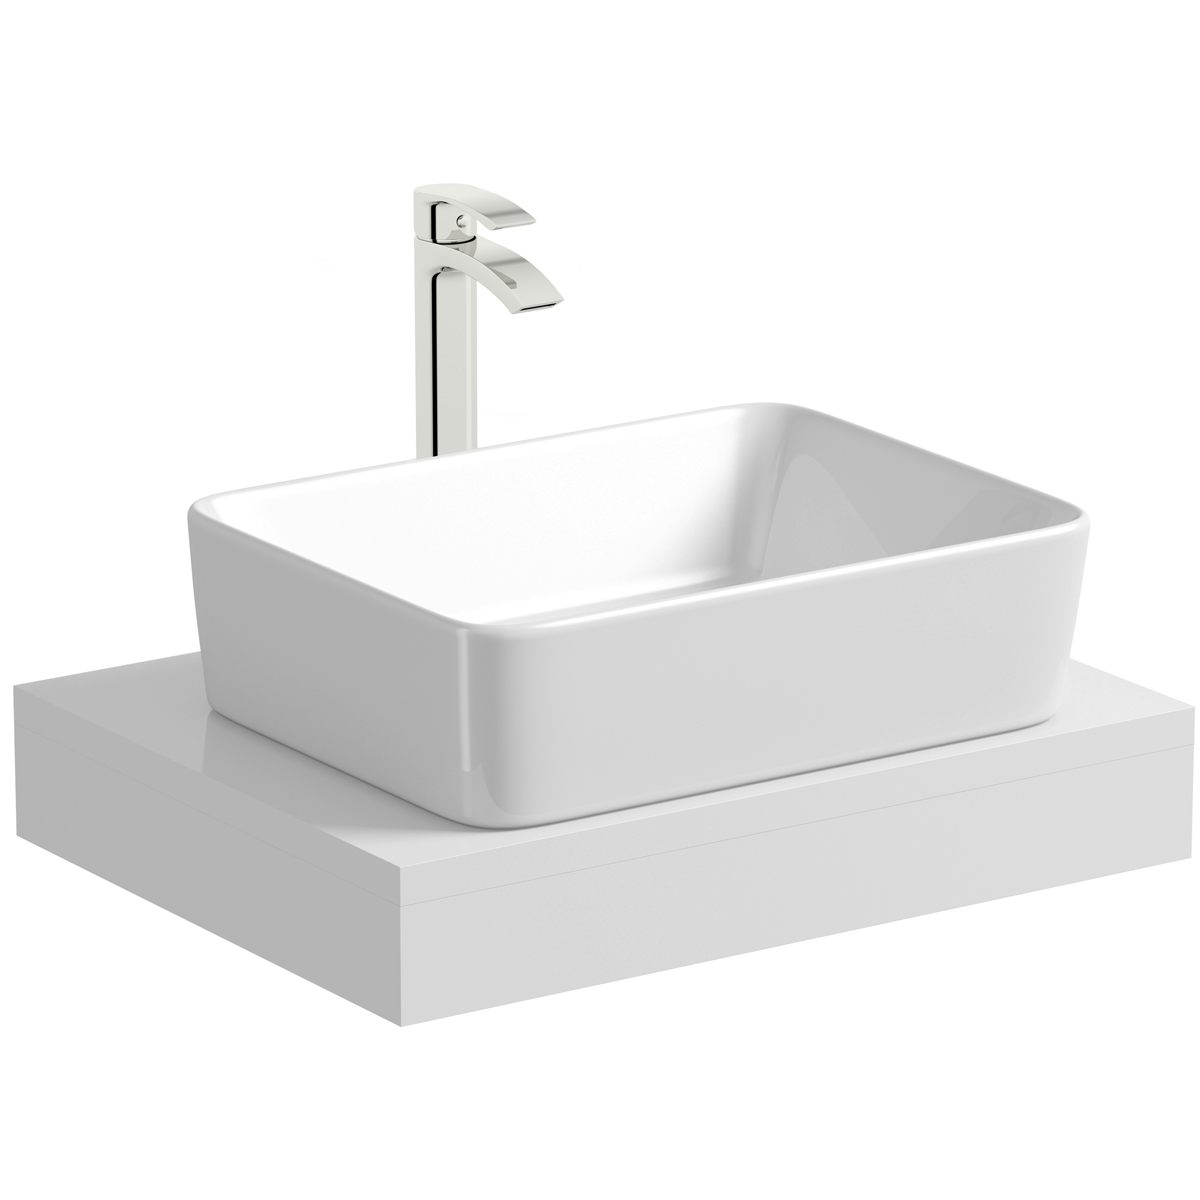 Mode Orion white countertop shelf 600mm with Ellis countertop basin, tap and waste